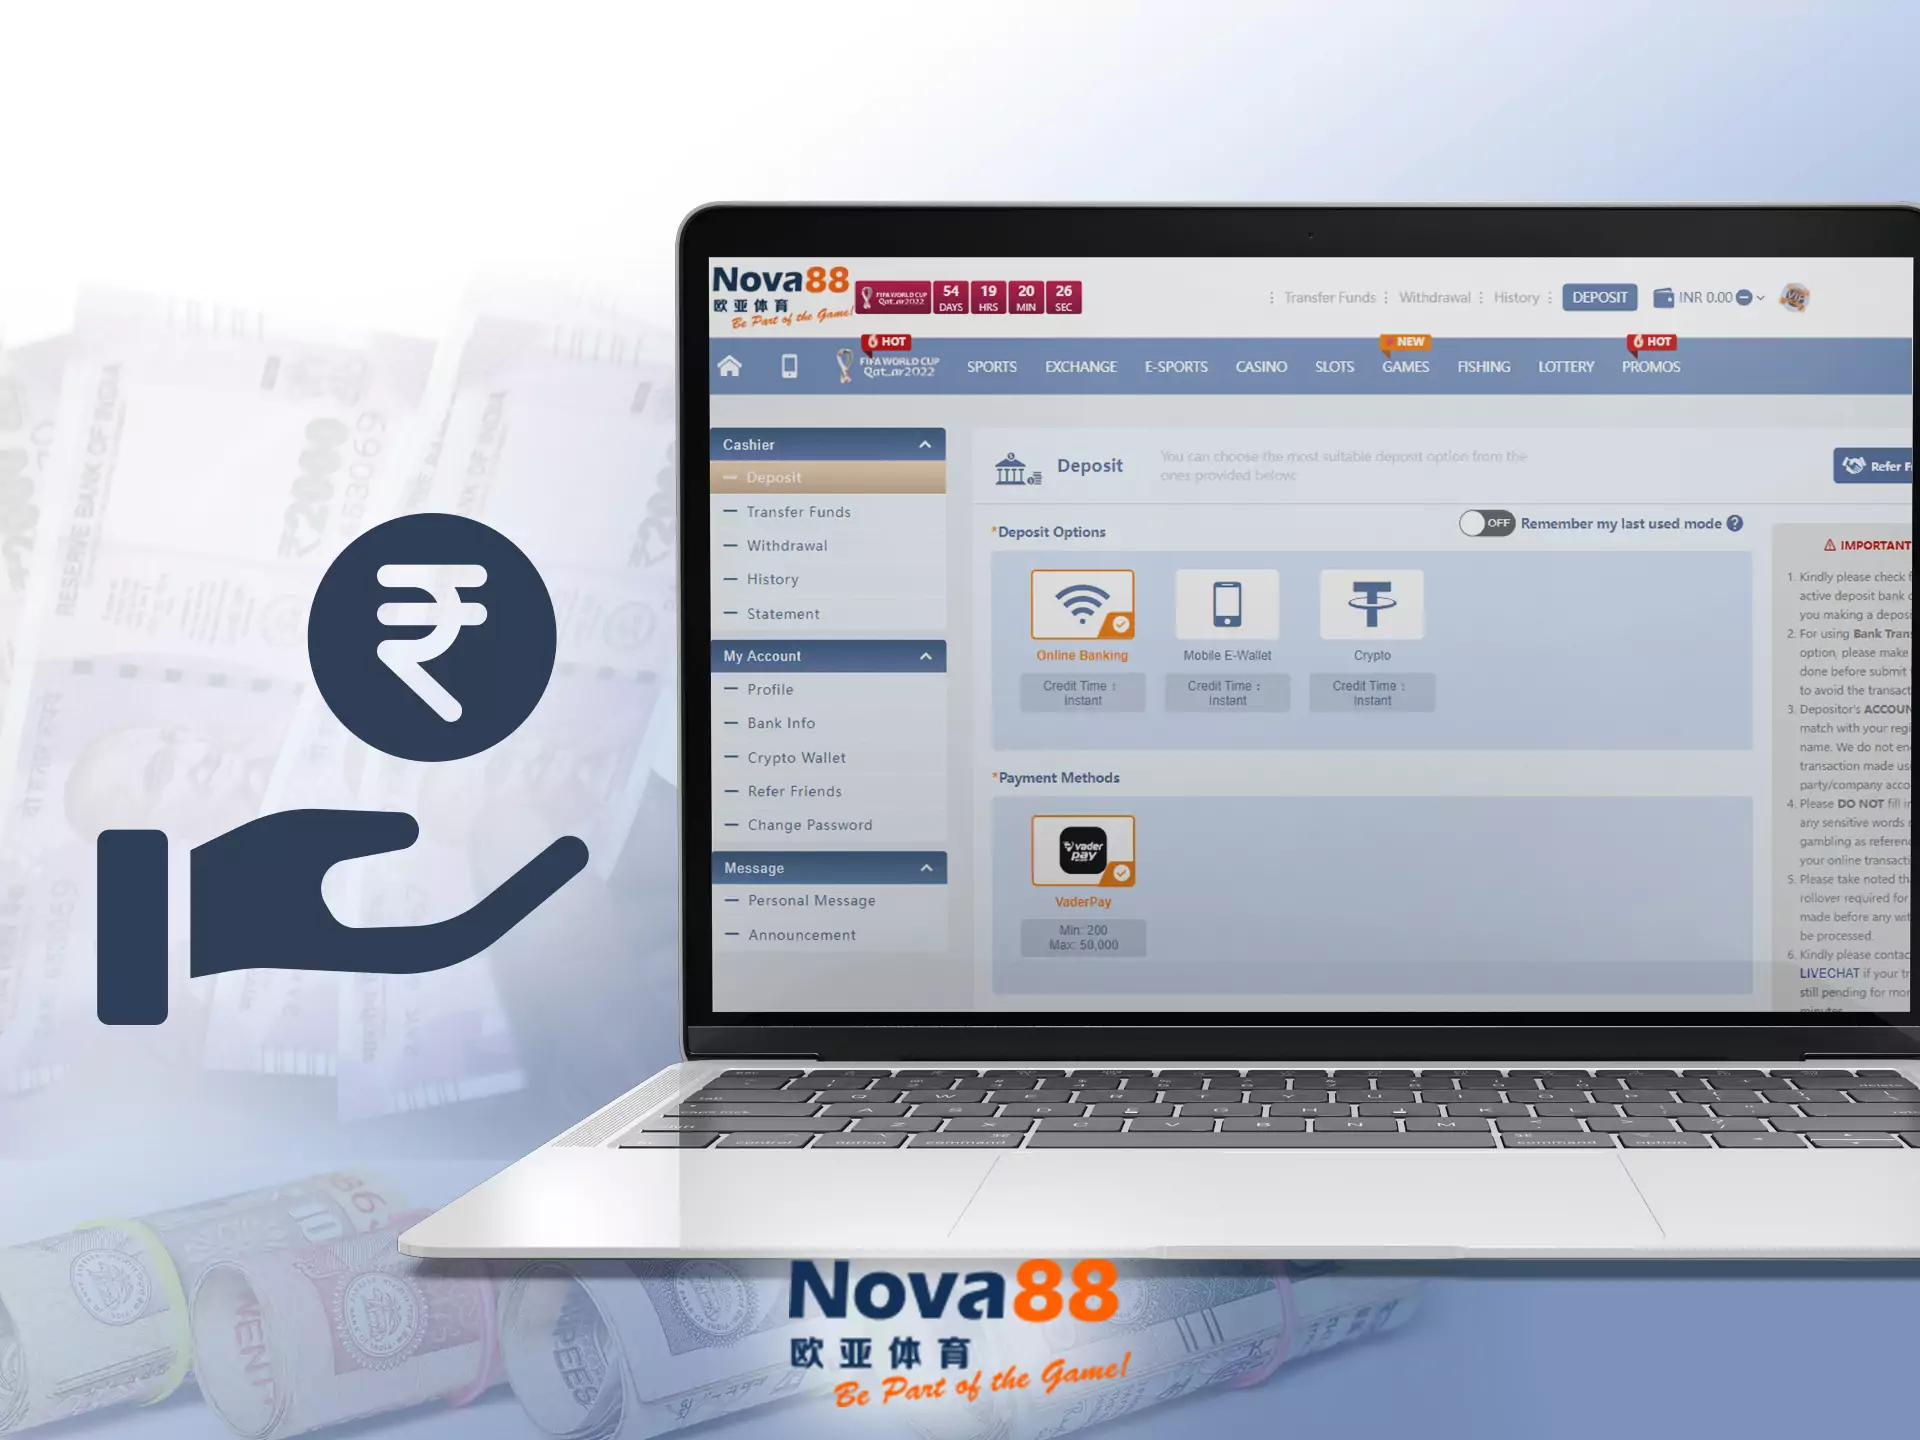 To top up your Nova88 account, just log in and choose a payment system.